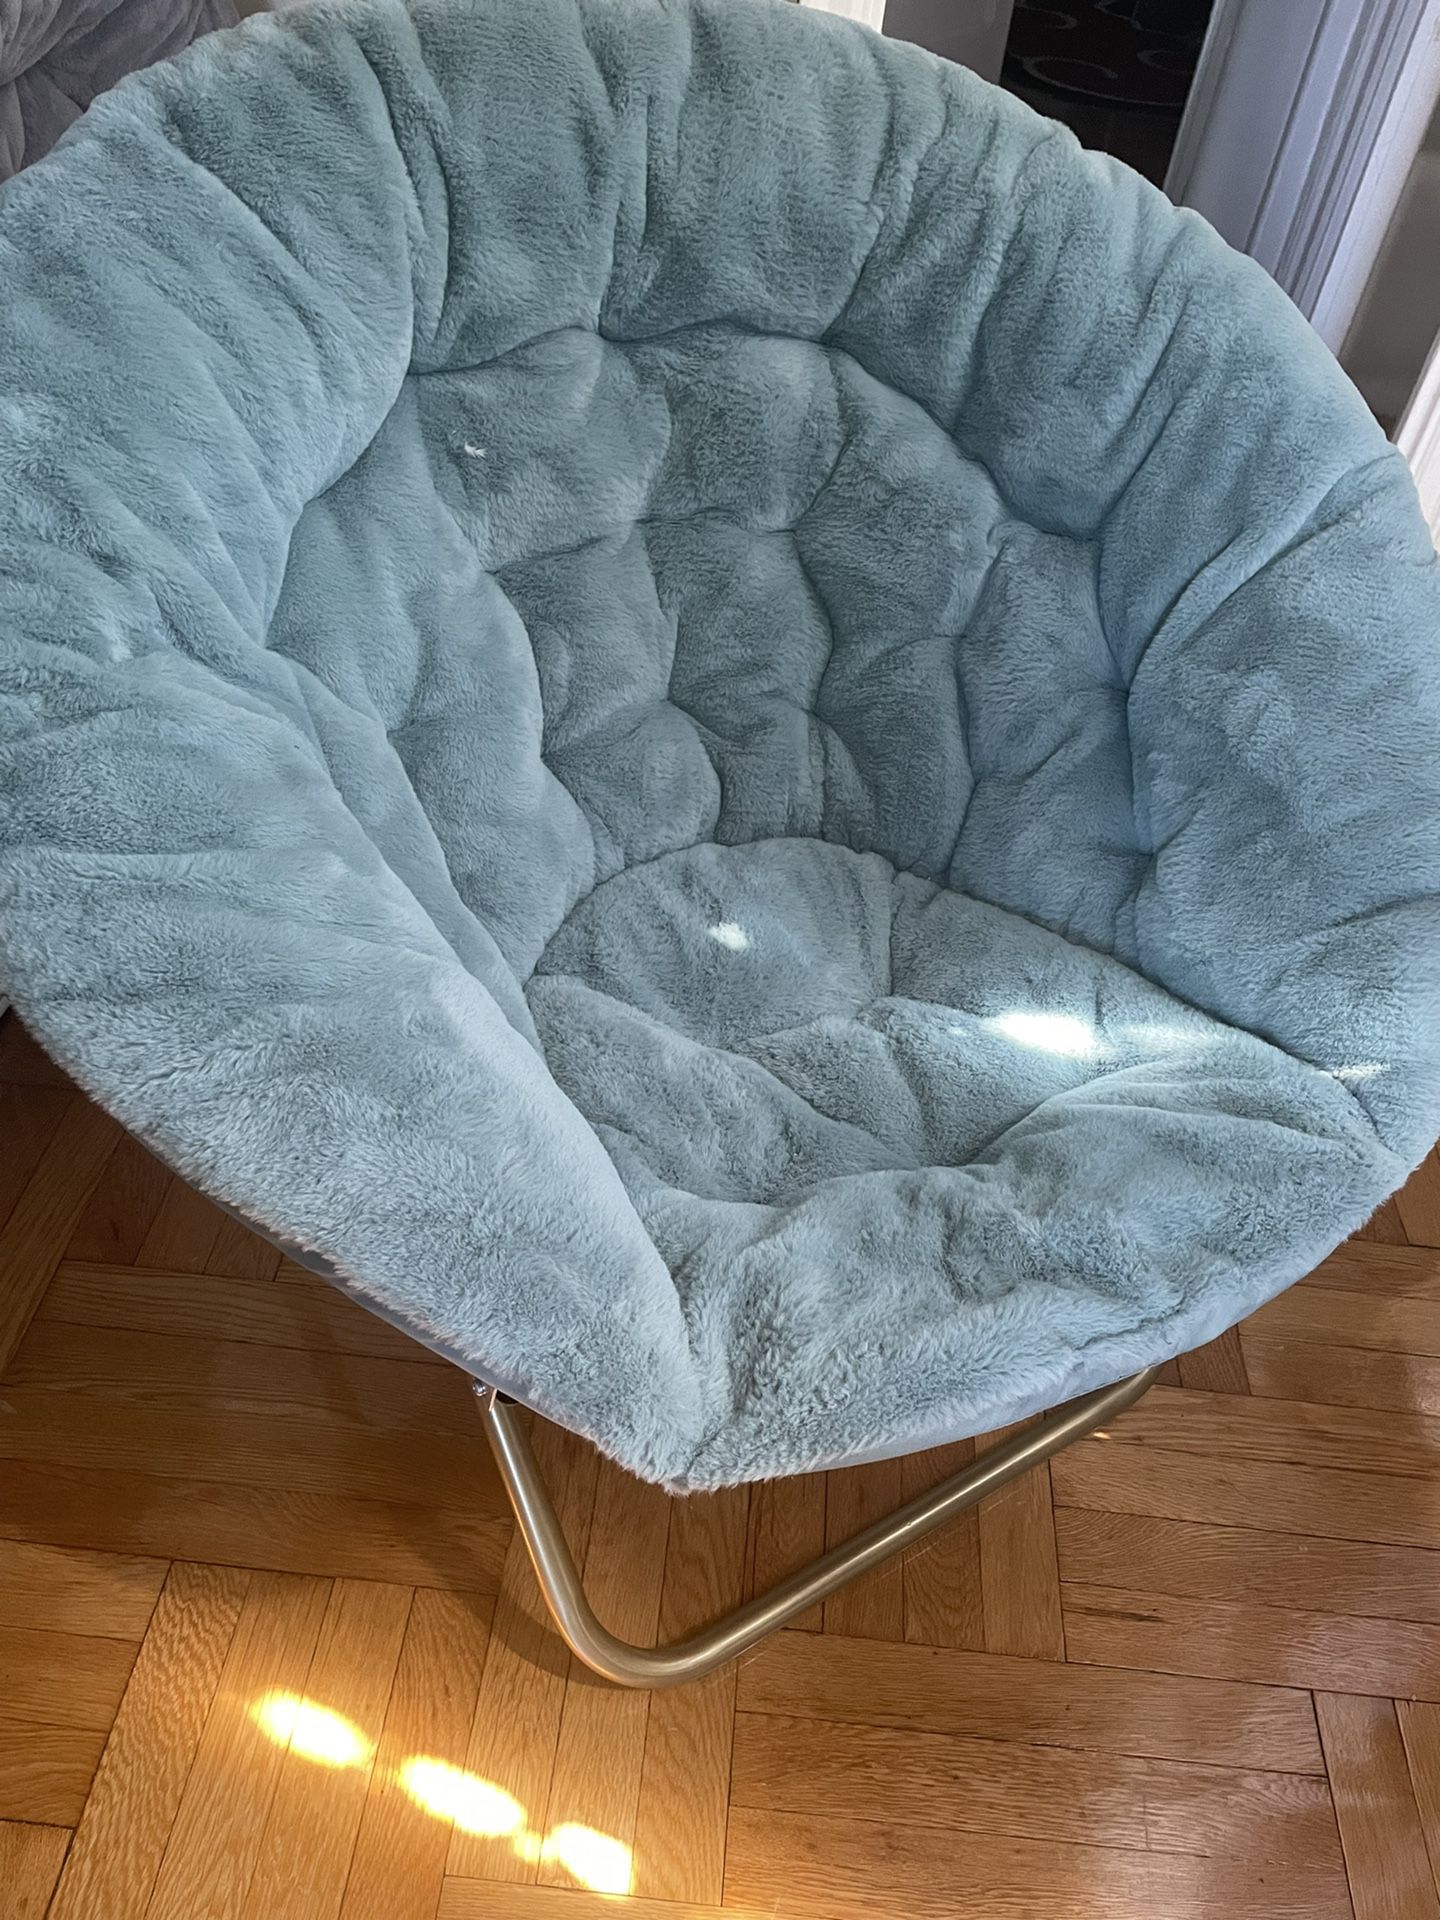 SELLING 1 COZY MILLIARD X LARGE FAUX FUR SAUCER CHAIR 